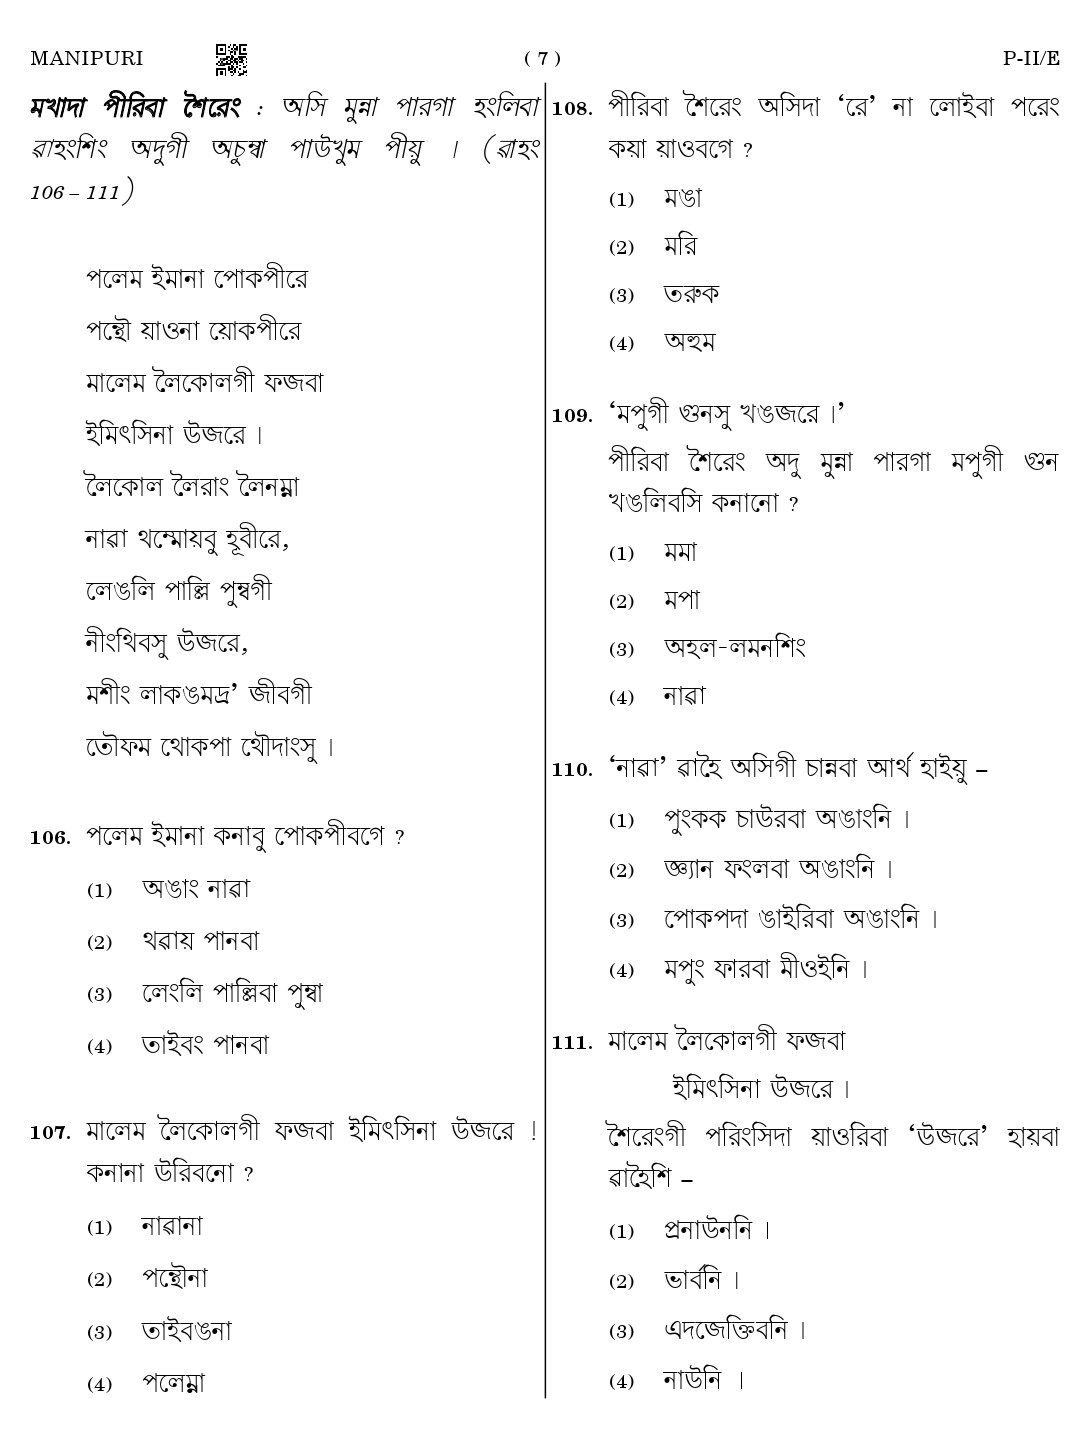 CTET August 2023 Manipuri Language Supplement Paper II Part IV and V 7